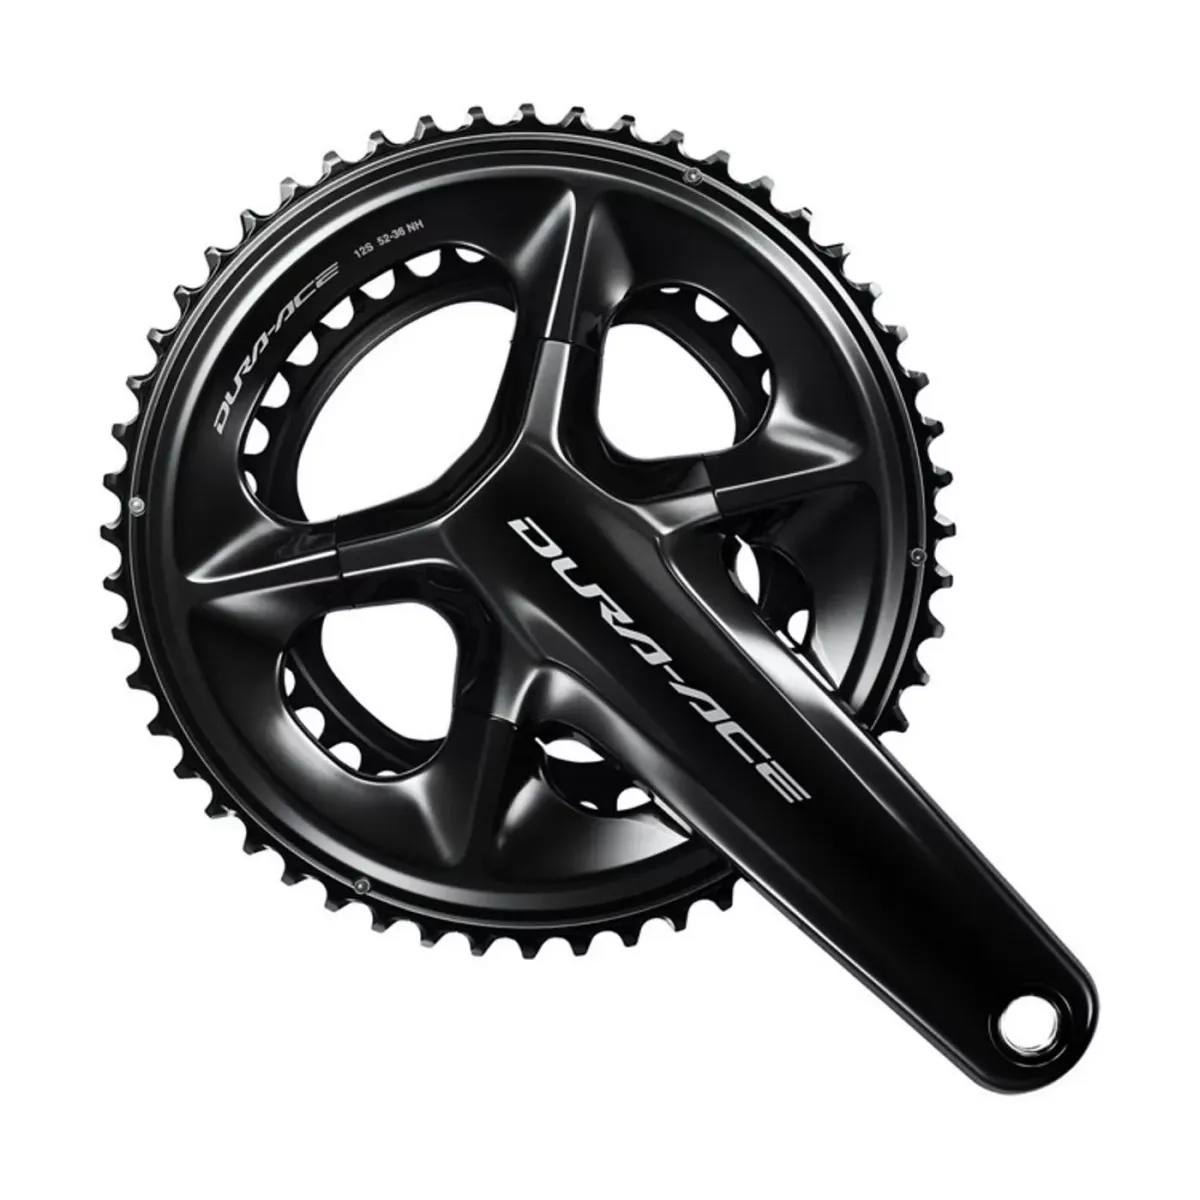 Shimano Issues Recall for 760,000 Dura-Ace and Ultegra Cranksets - Check if Yours is Affected